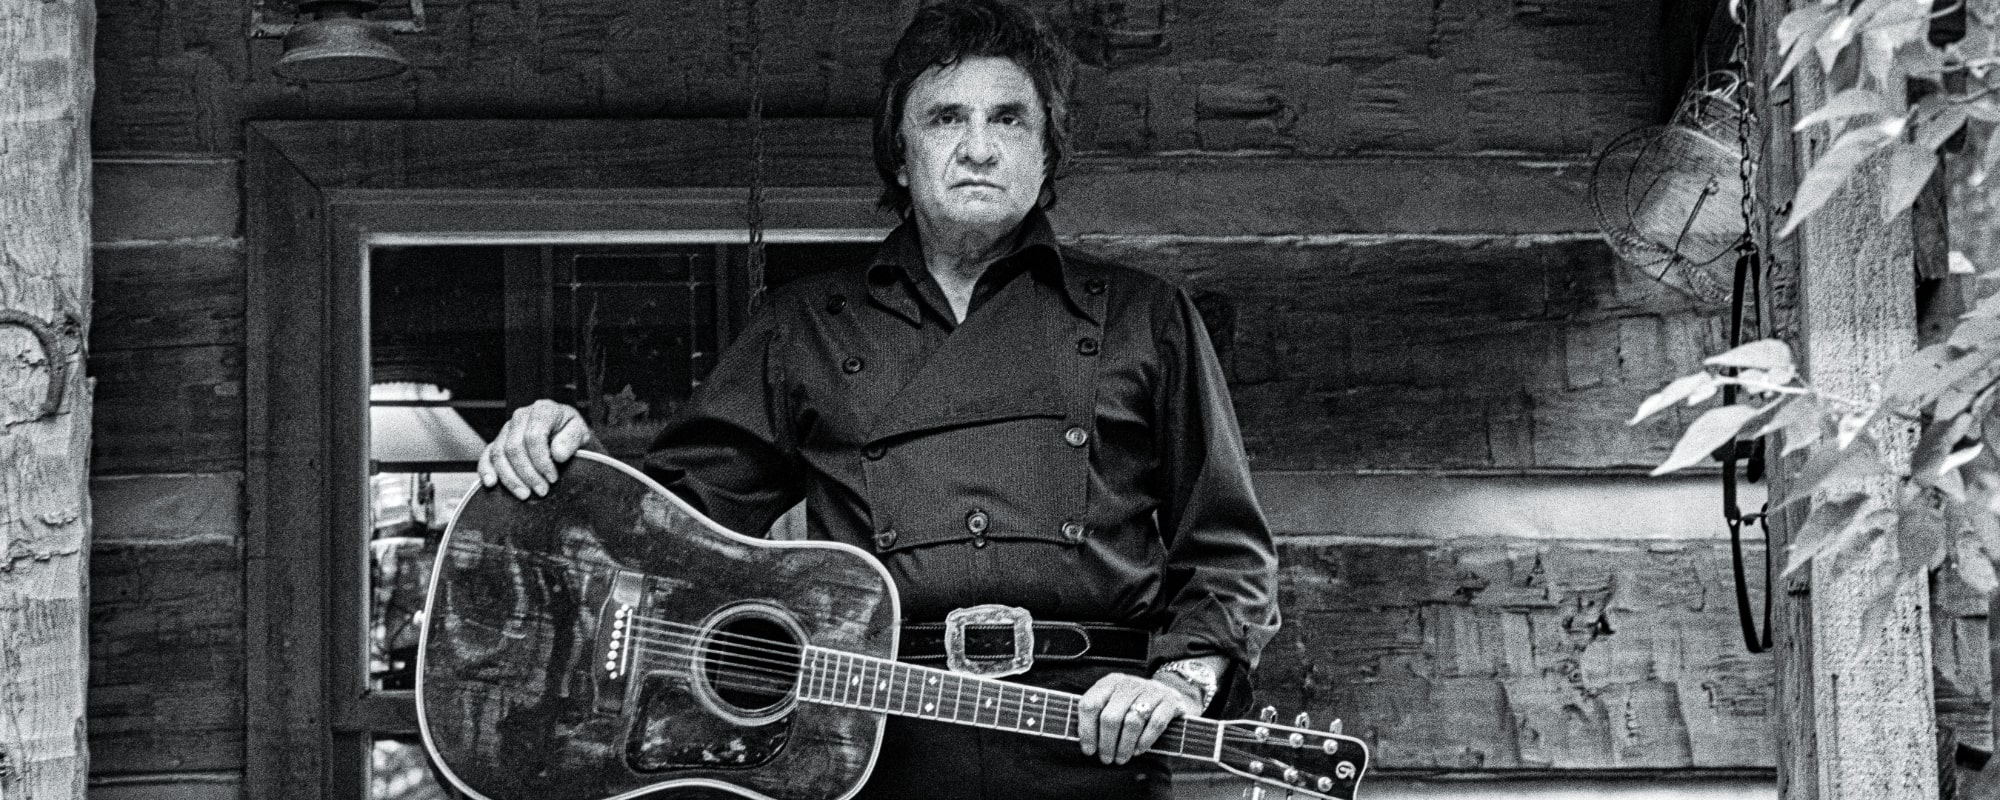 An Unreleased Johnny Cash Album from 1993 Will Finally Drop This Summer—Listen to the First Preview of ‘Songwriter’ Today